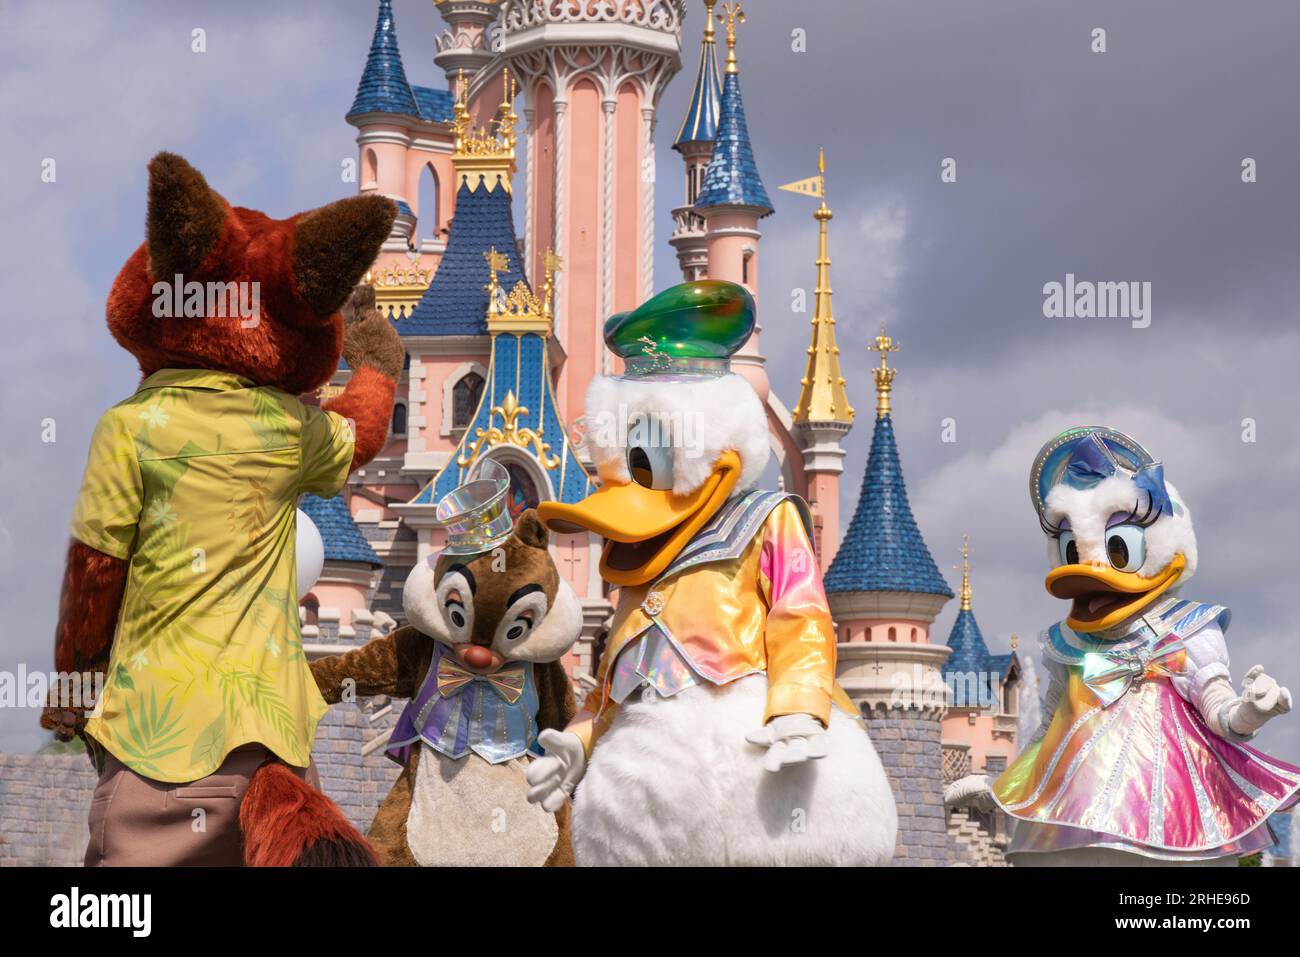 Disneyland Paris; Disney characters and the Disneyland Castle dancing in the Disneyland Parade; Nick Wilde the fox; Chip, Donald Duck and Daffy Duck Stock Photo